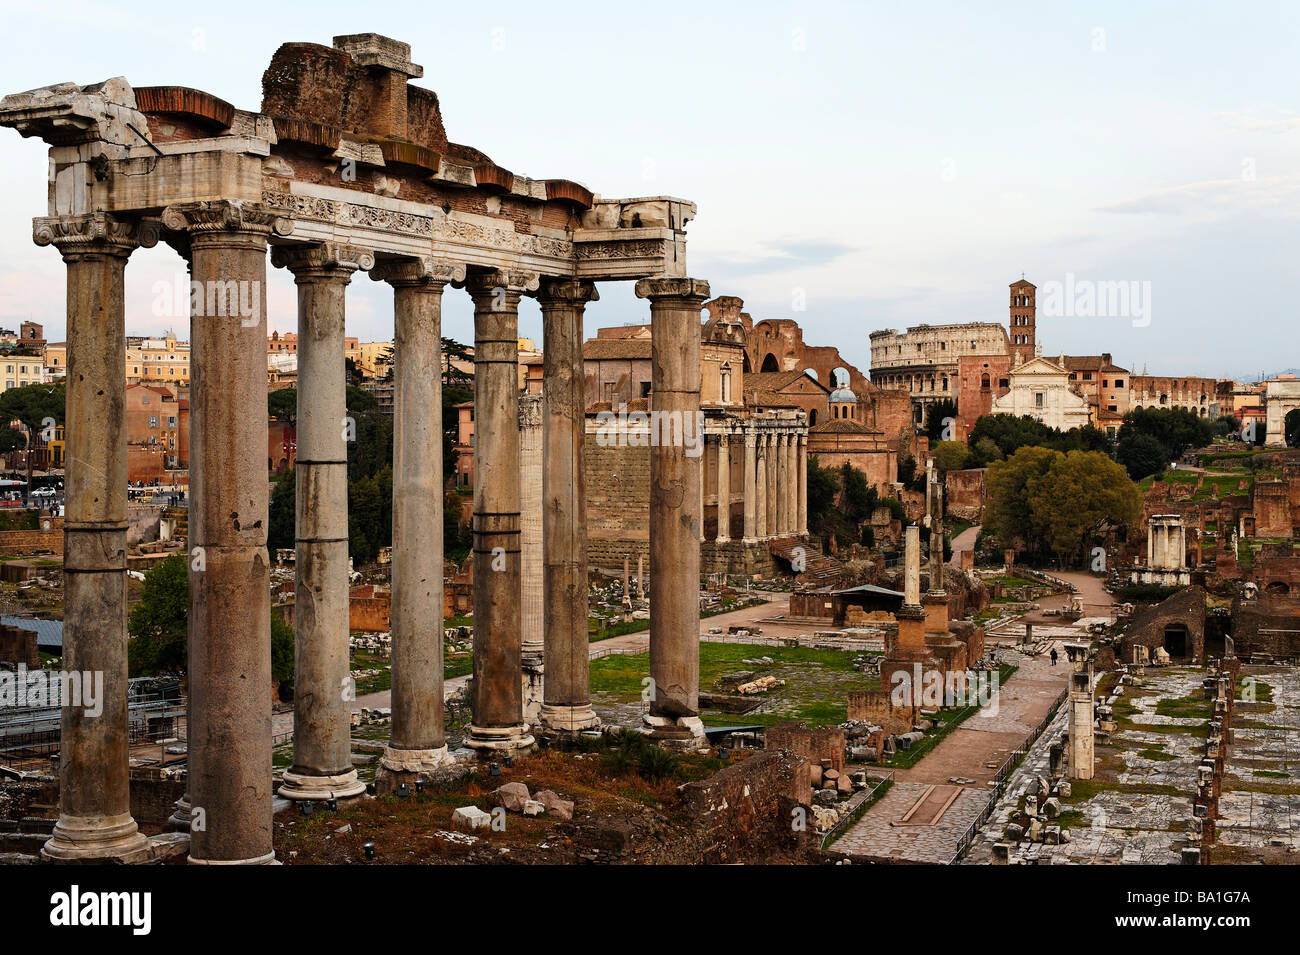 Looking from Capitoline Hill over the Roman Forum towards the  Colosseum. The columns of Temple of Saturn in the foreground Stock Photo